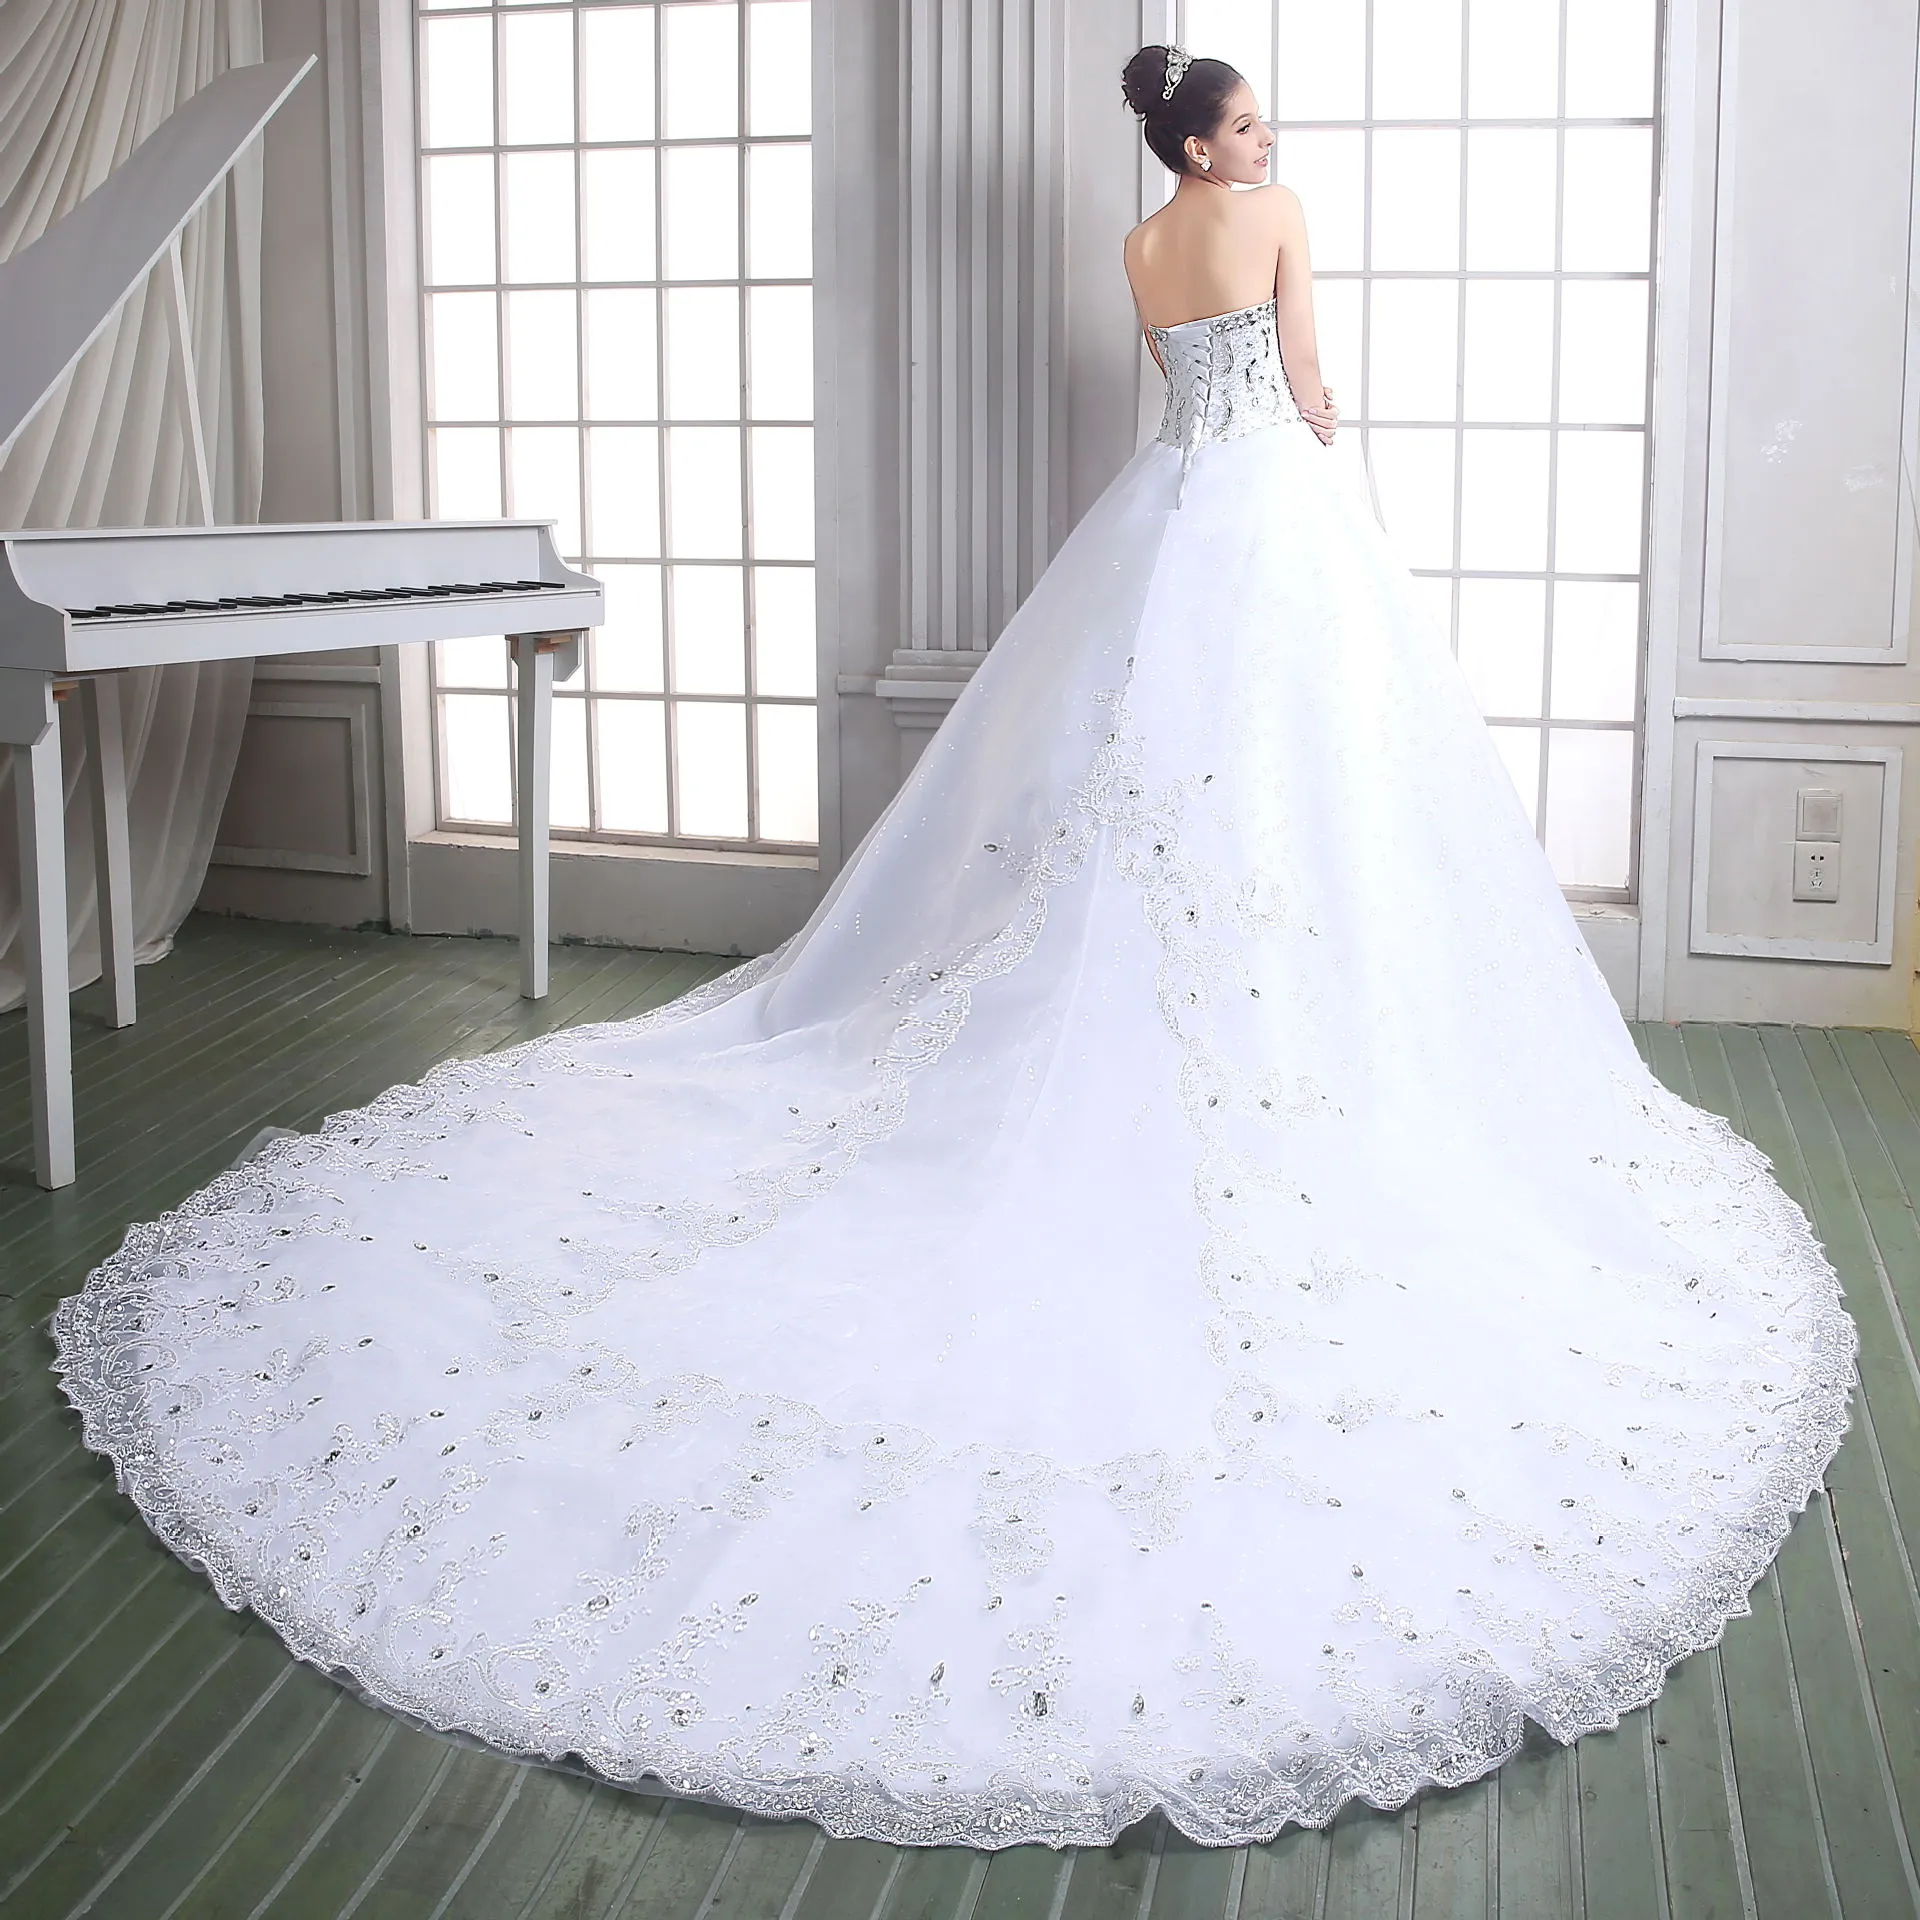 Luxury Best Wedding Gown Fashion Handmade Crystals Beads Cathedral Train Spring Summer Wedding Dress 2015 Bridal Gown with Lace Up